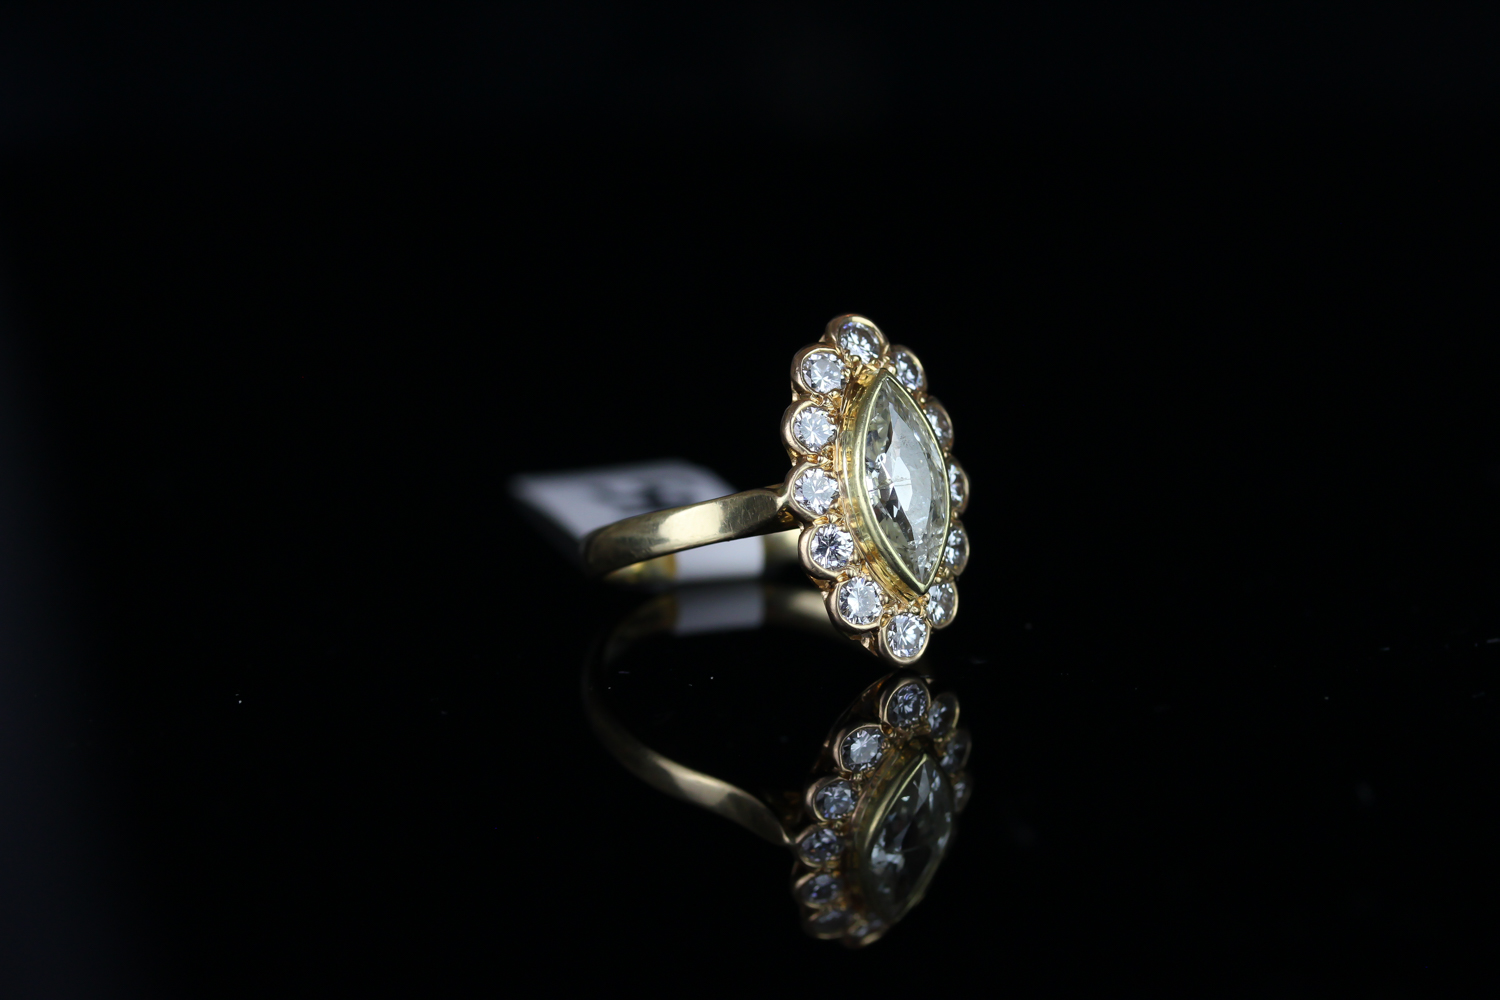 18CT MARQUISE DIAMOND CLUSTER RING, estimated centre stone 1.00ct,surrounded brilliant cut stones - Image 2 of 3